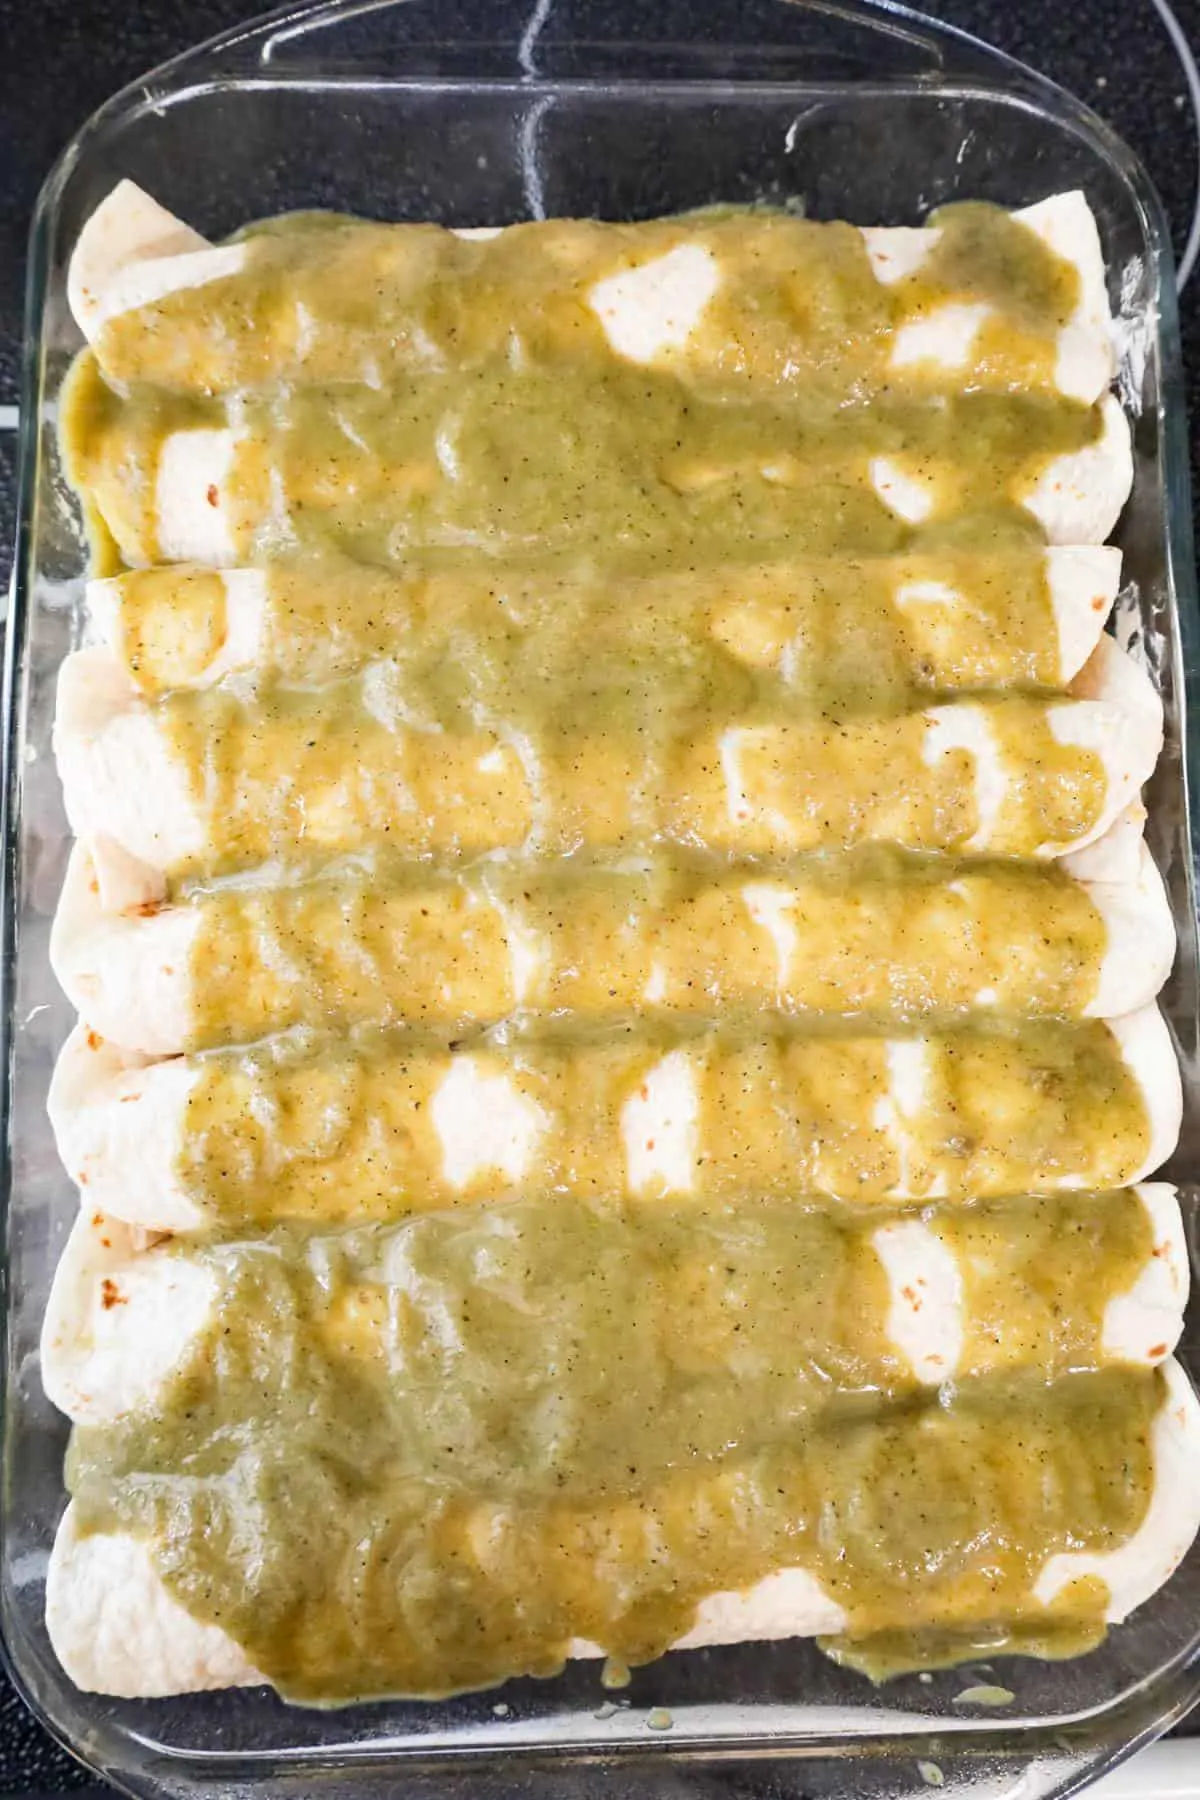 green enchilada sauce on top of rolled tortillas in a baking dish